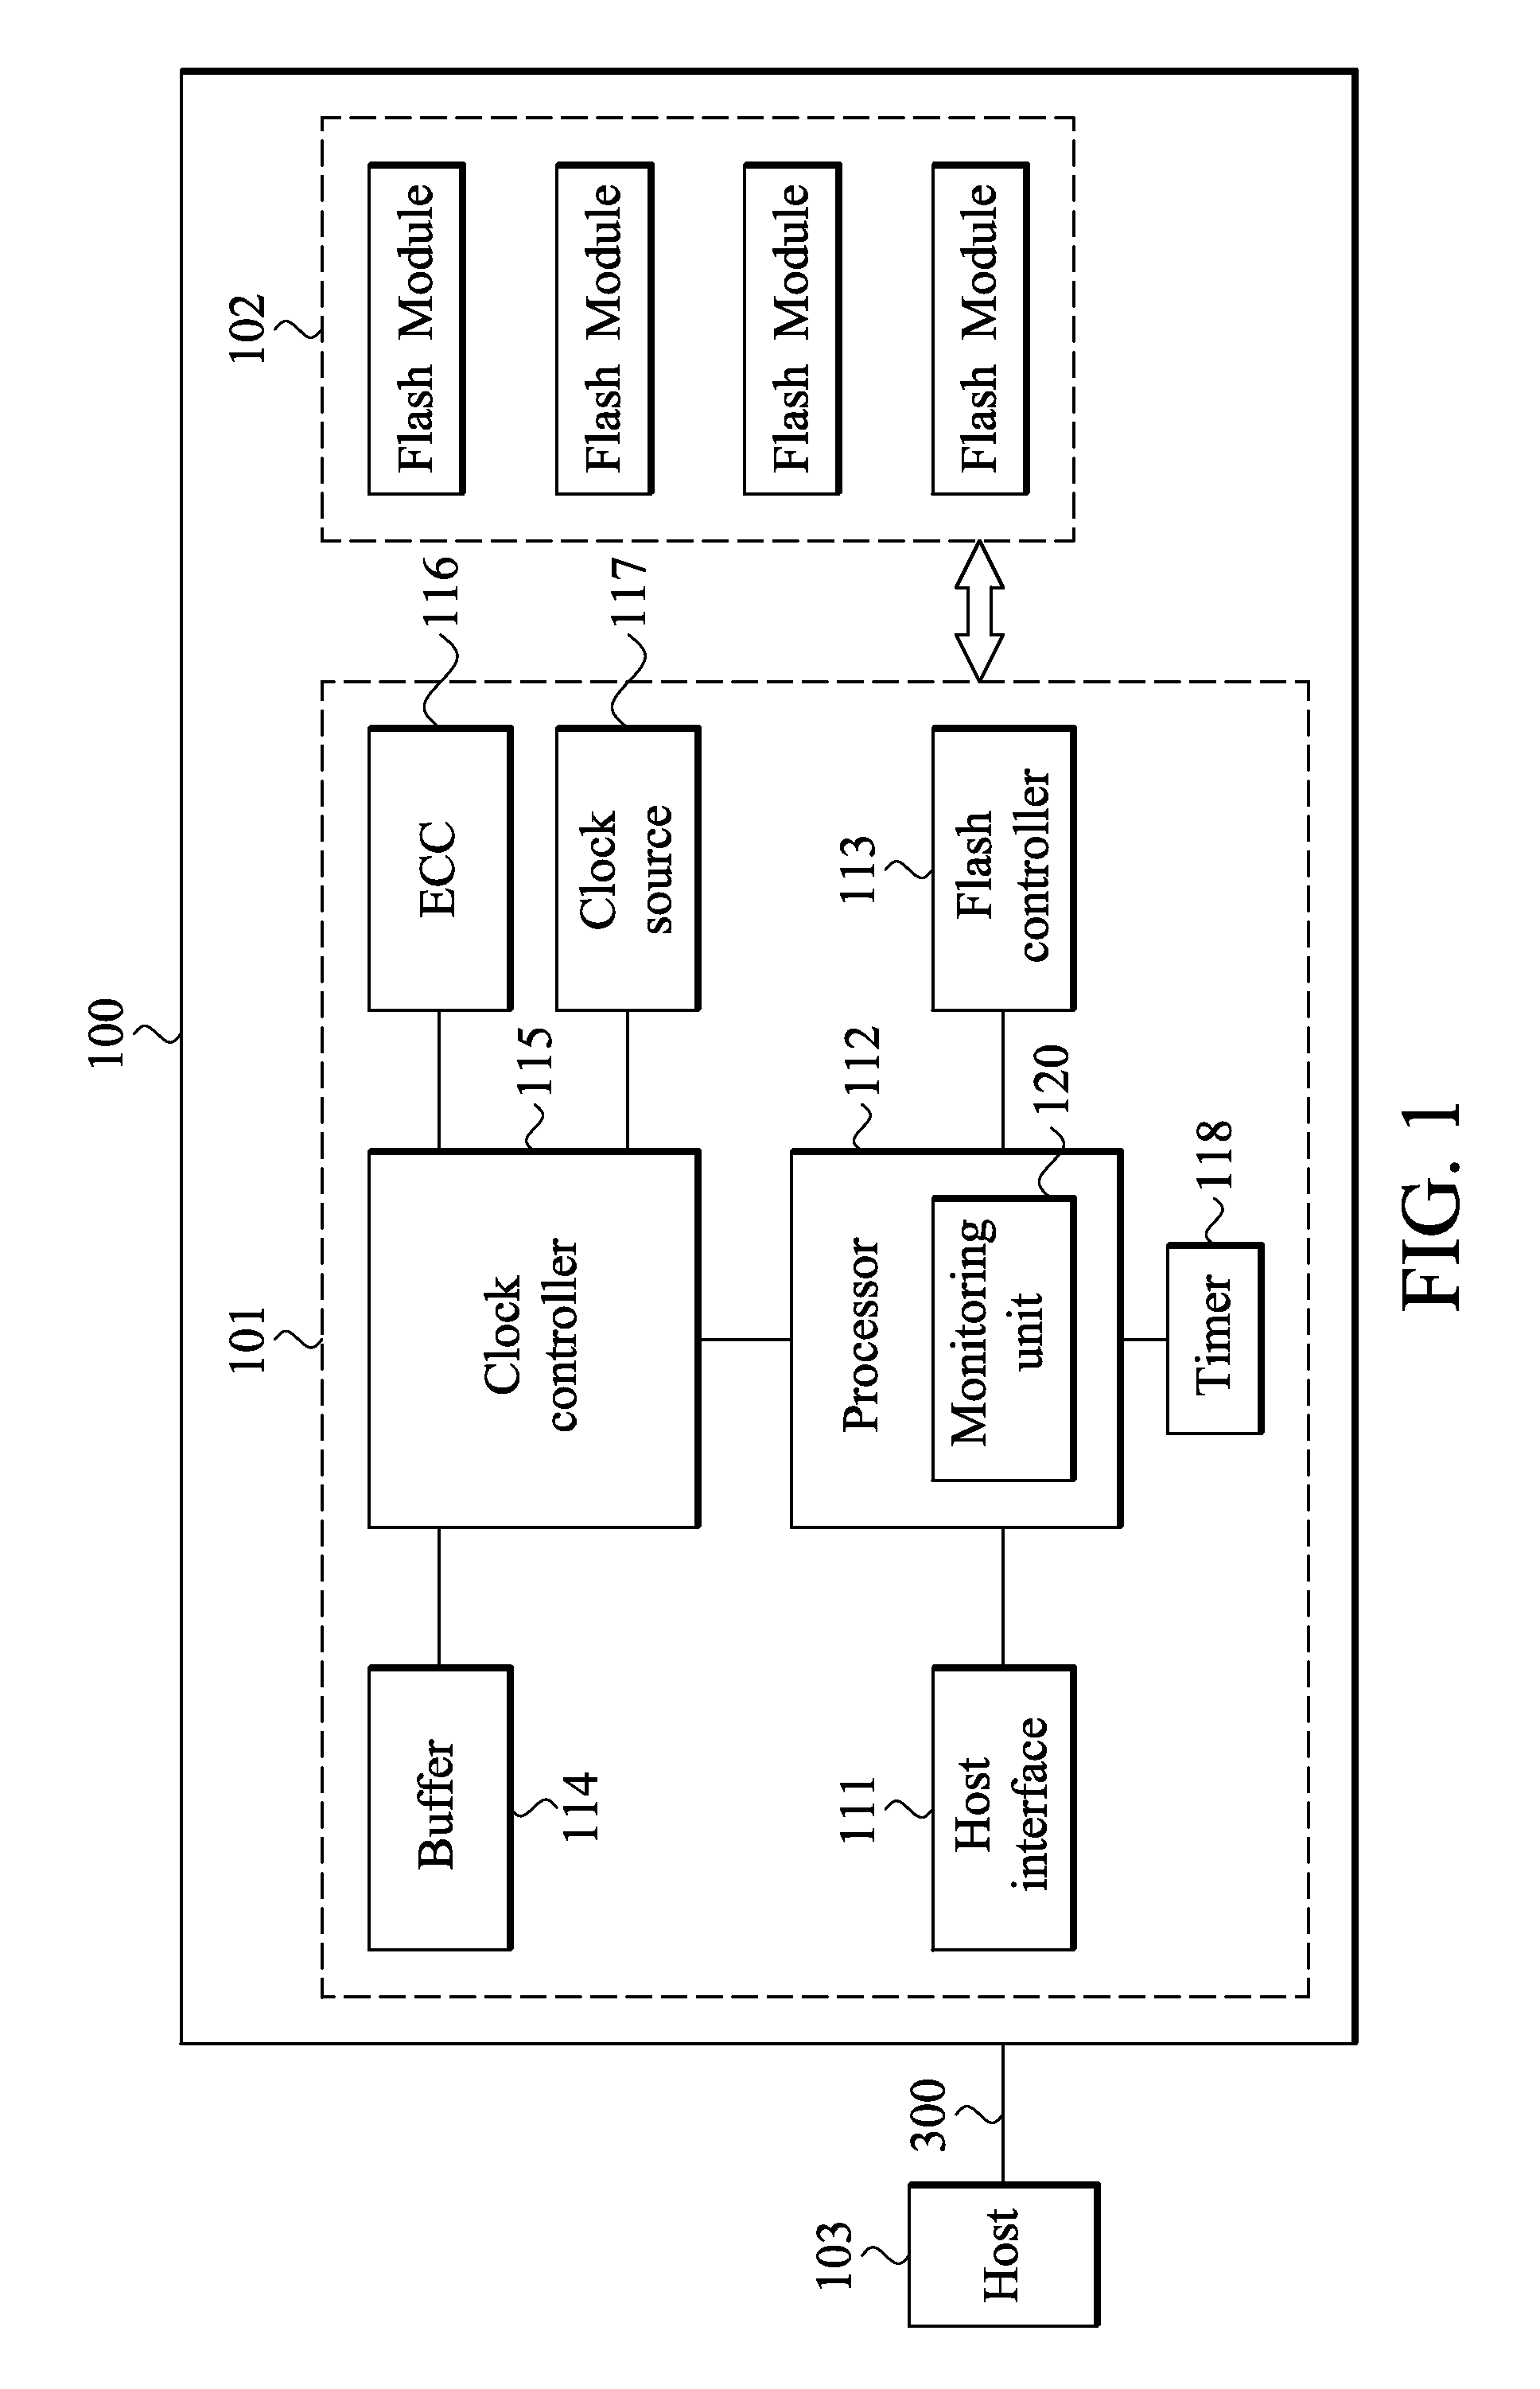 Method and apparatus for reducing memory size and bandwidth